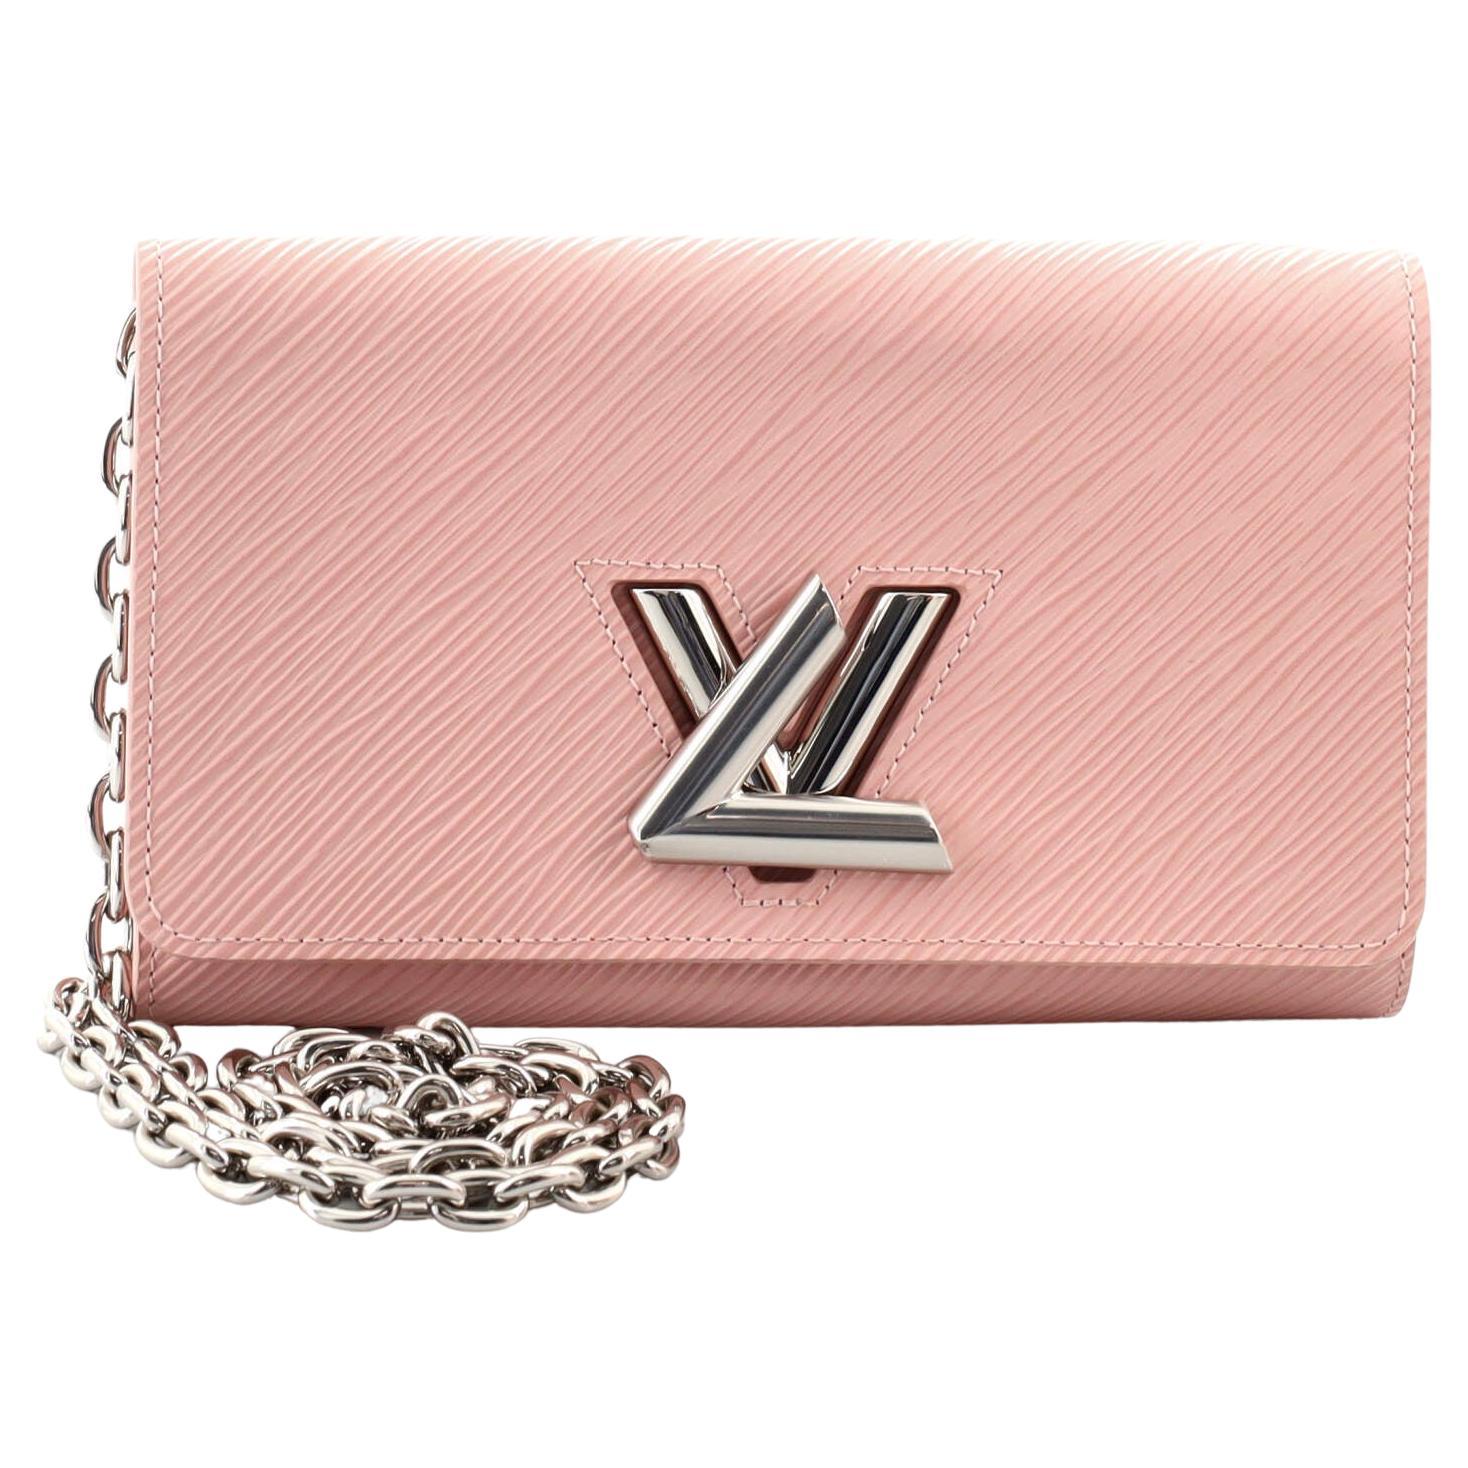  Lckaey clutch conversion kit purse chain insert strap For lv  Doudou victorin short wallet transformation diagonal bag3022-pink 10 * 7cm  : Clothing, Shoes & Jewelry